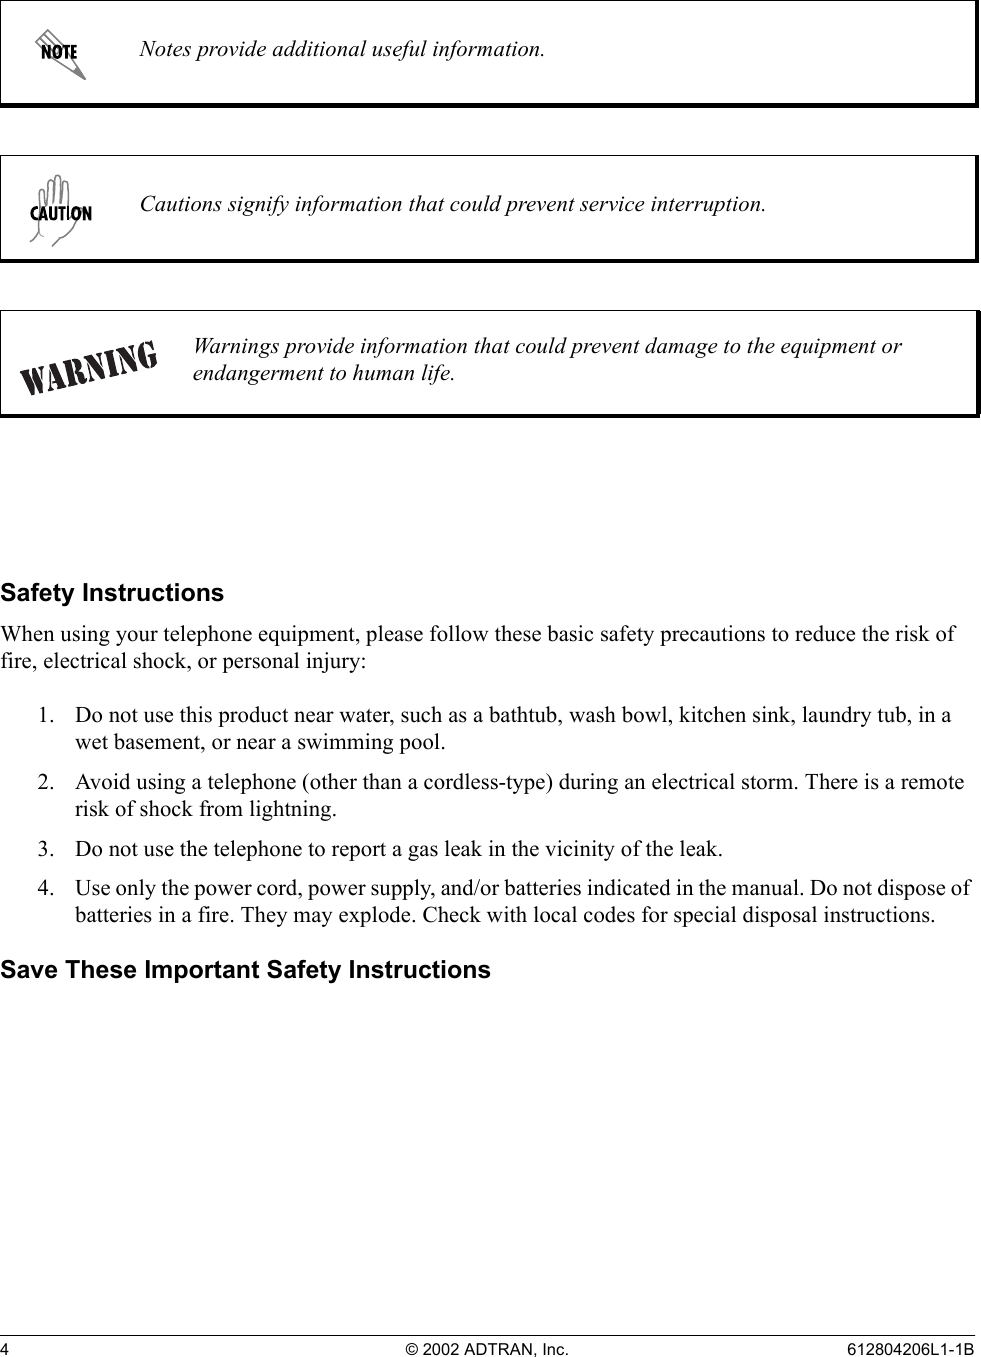 4 © 2002 ADTRAN, Inc. 612804206L1-1BSafety InstructionsWhen using your telephone equipment, please follow these basic safety precautions to reduce the risk of fire, electrical shock, or personal injury:1. Do not use this product near water, such as a bathtub, wash bowl, kitchen sink, laundry tub, in a wet basement, or near a swimming pool.2. Avoid using a telephone (other than a cordless-type) during an electrical storm. There is a remote risk of shock from lightning.3. Do not use the telephone to report a gas leak in the vicinity of the leak.4. Use only the power cord, power supply, and/or batteries indicated in the manual. Do not dispose of batteries in a fire. They may explode. Check with local codes for special disposal instructions.Save These Important Safety InstructionsNotes provide additional useful information.Cautions signify information that could prevent service interruption.Warnings provide information that could prevent damage to the equipment or endangerment to human life.